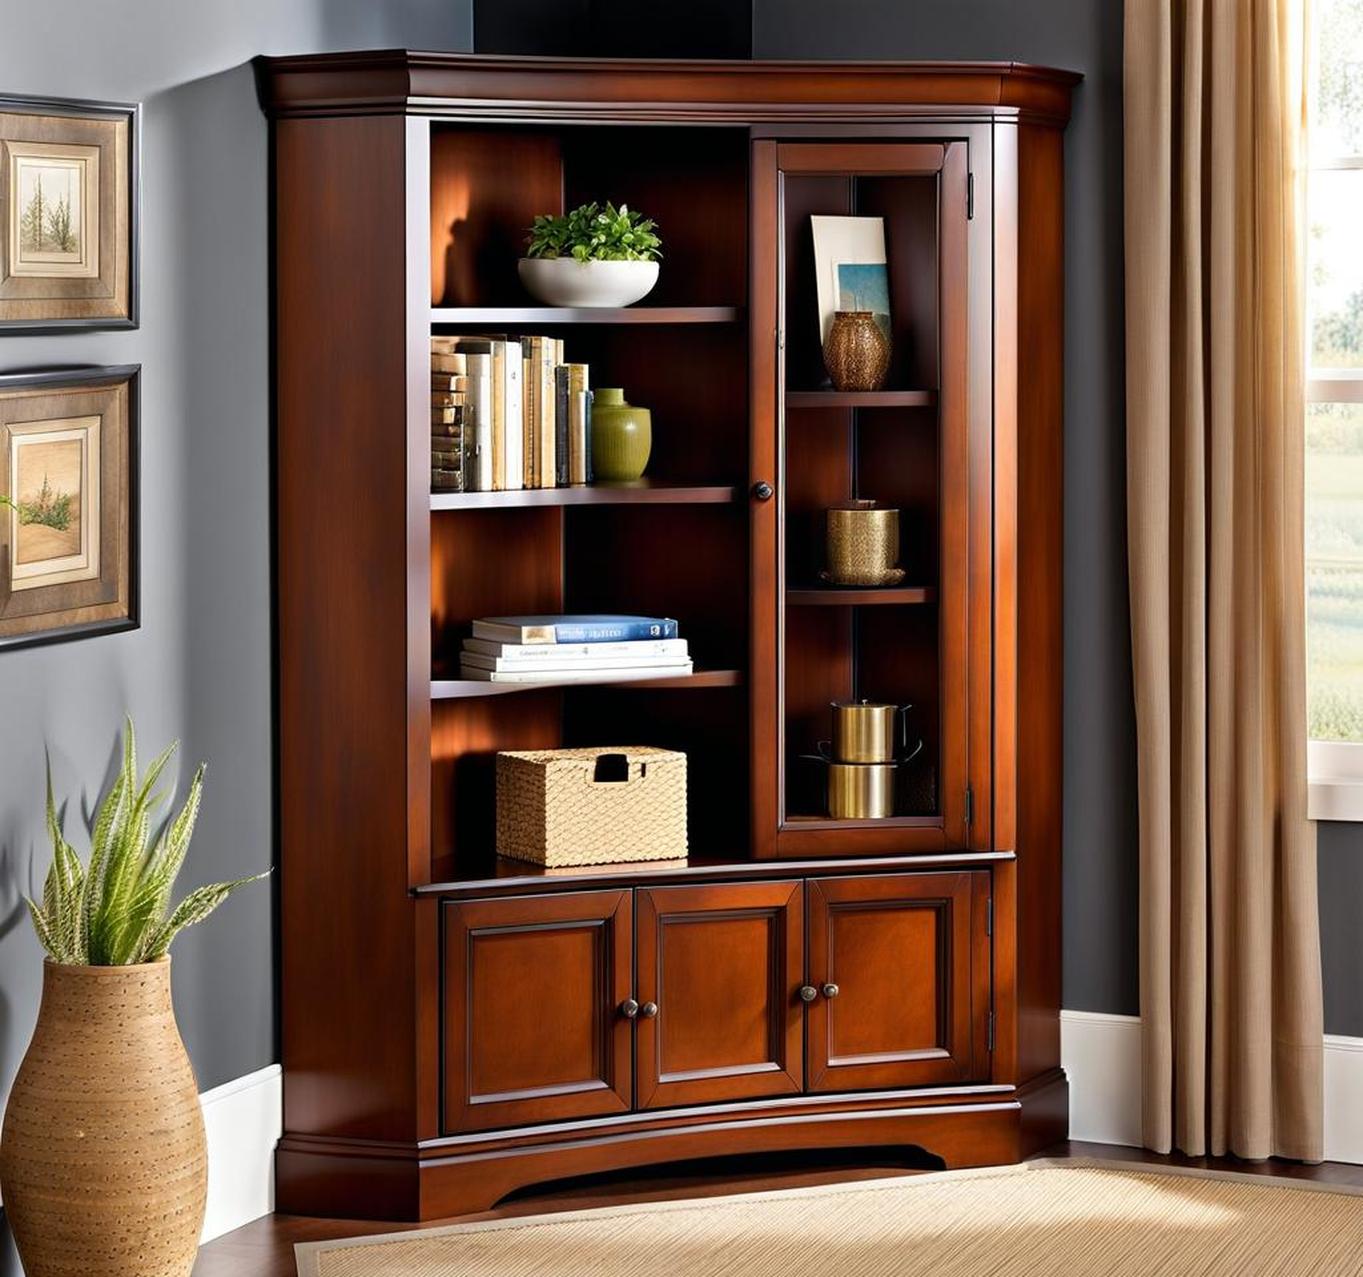 The Complete Guide to Living Room Corner Storage Cabinets